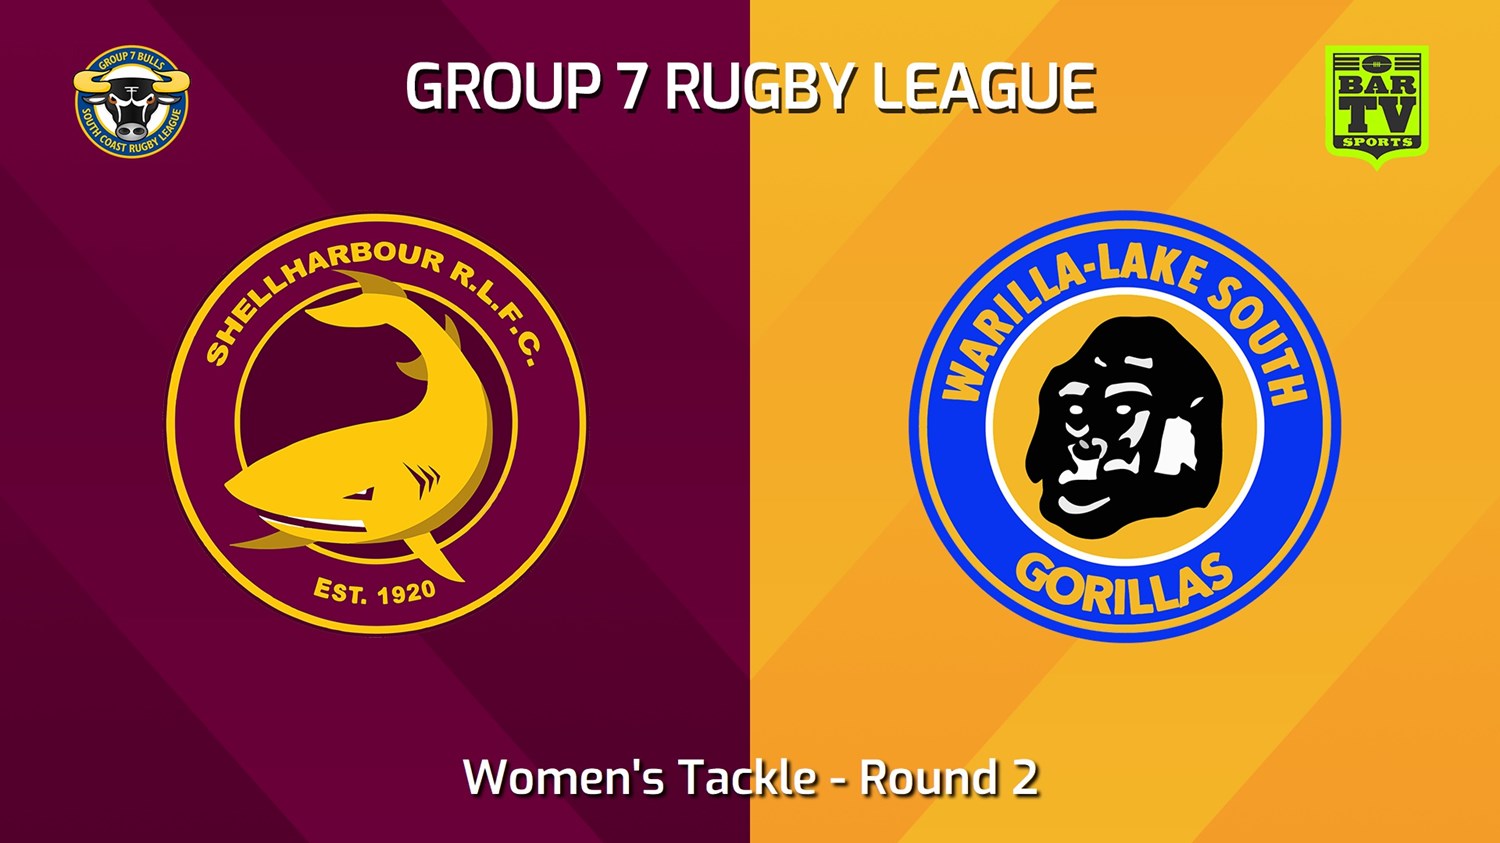 240616-video-South Coast Round 2 - Women's Tackle - Shellharbour Sharks v Warilla-Lake South Gorillas Slate Image